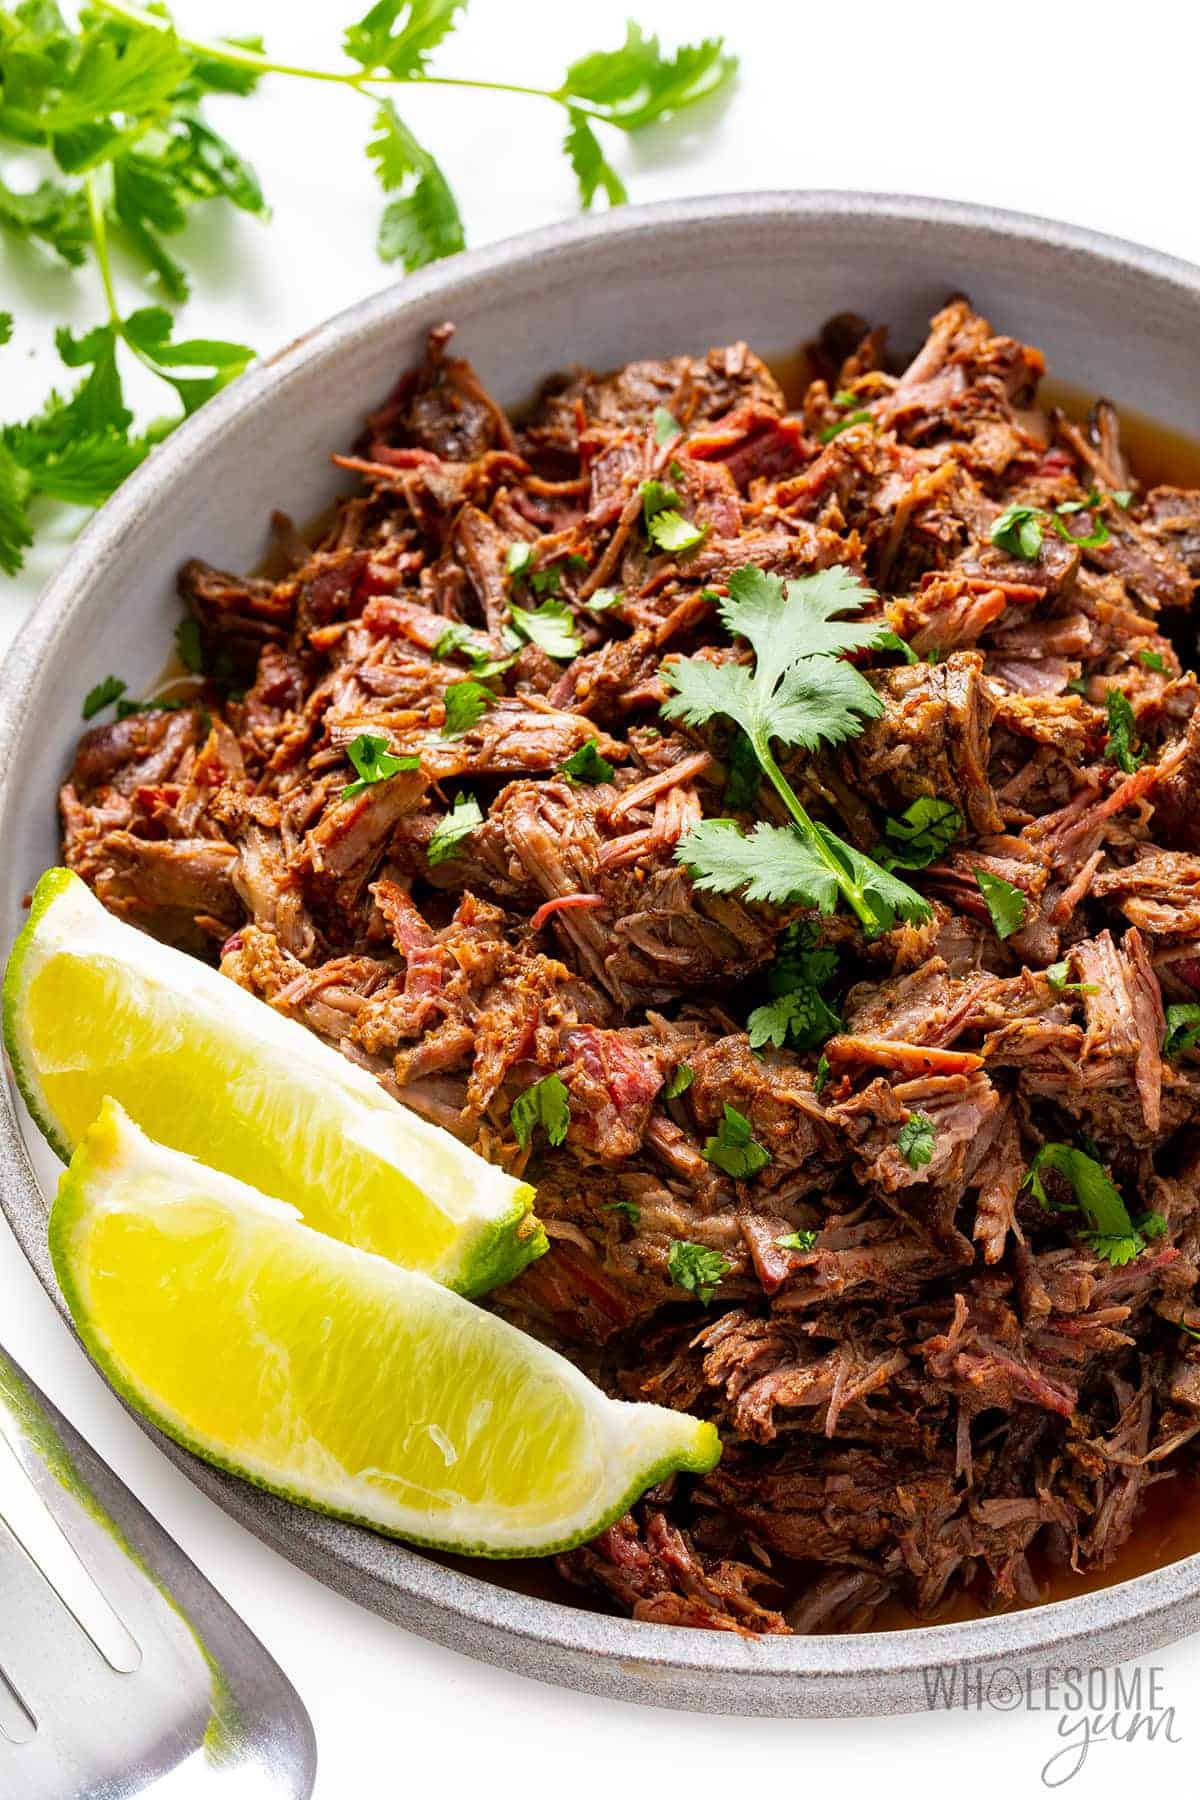 Big pile of copycat Chipotle barbacoa on a plate.